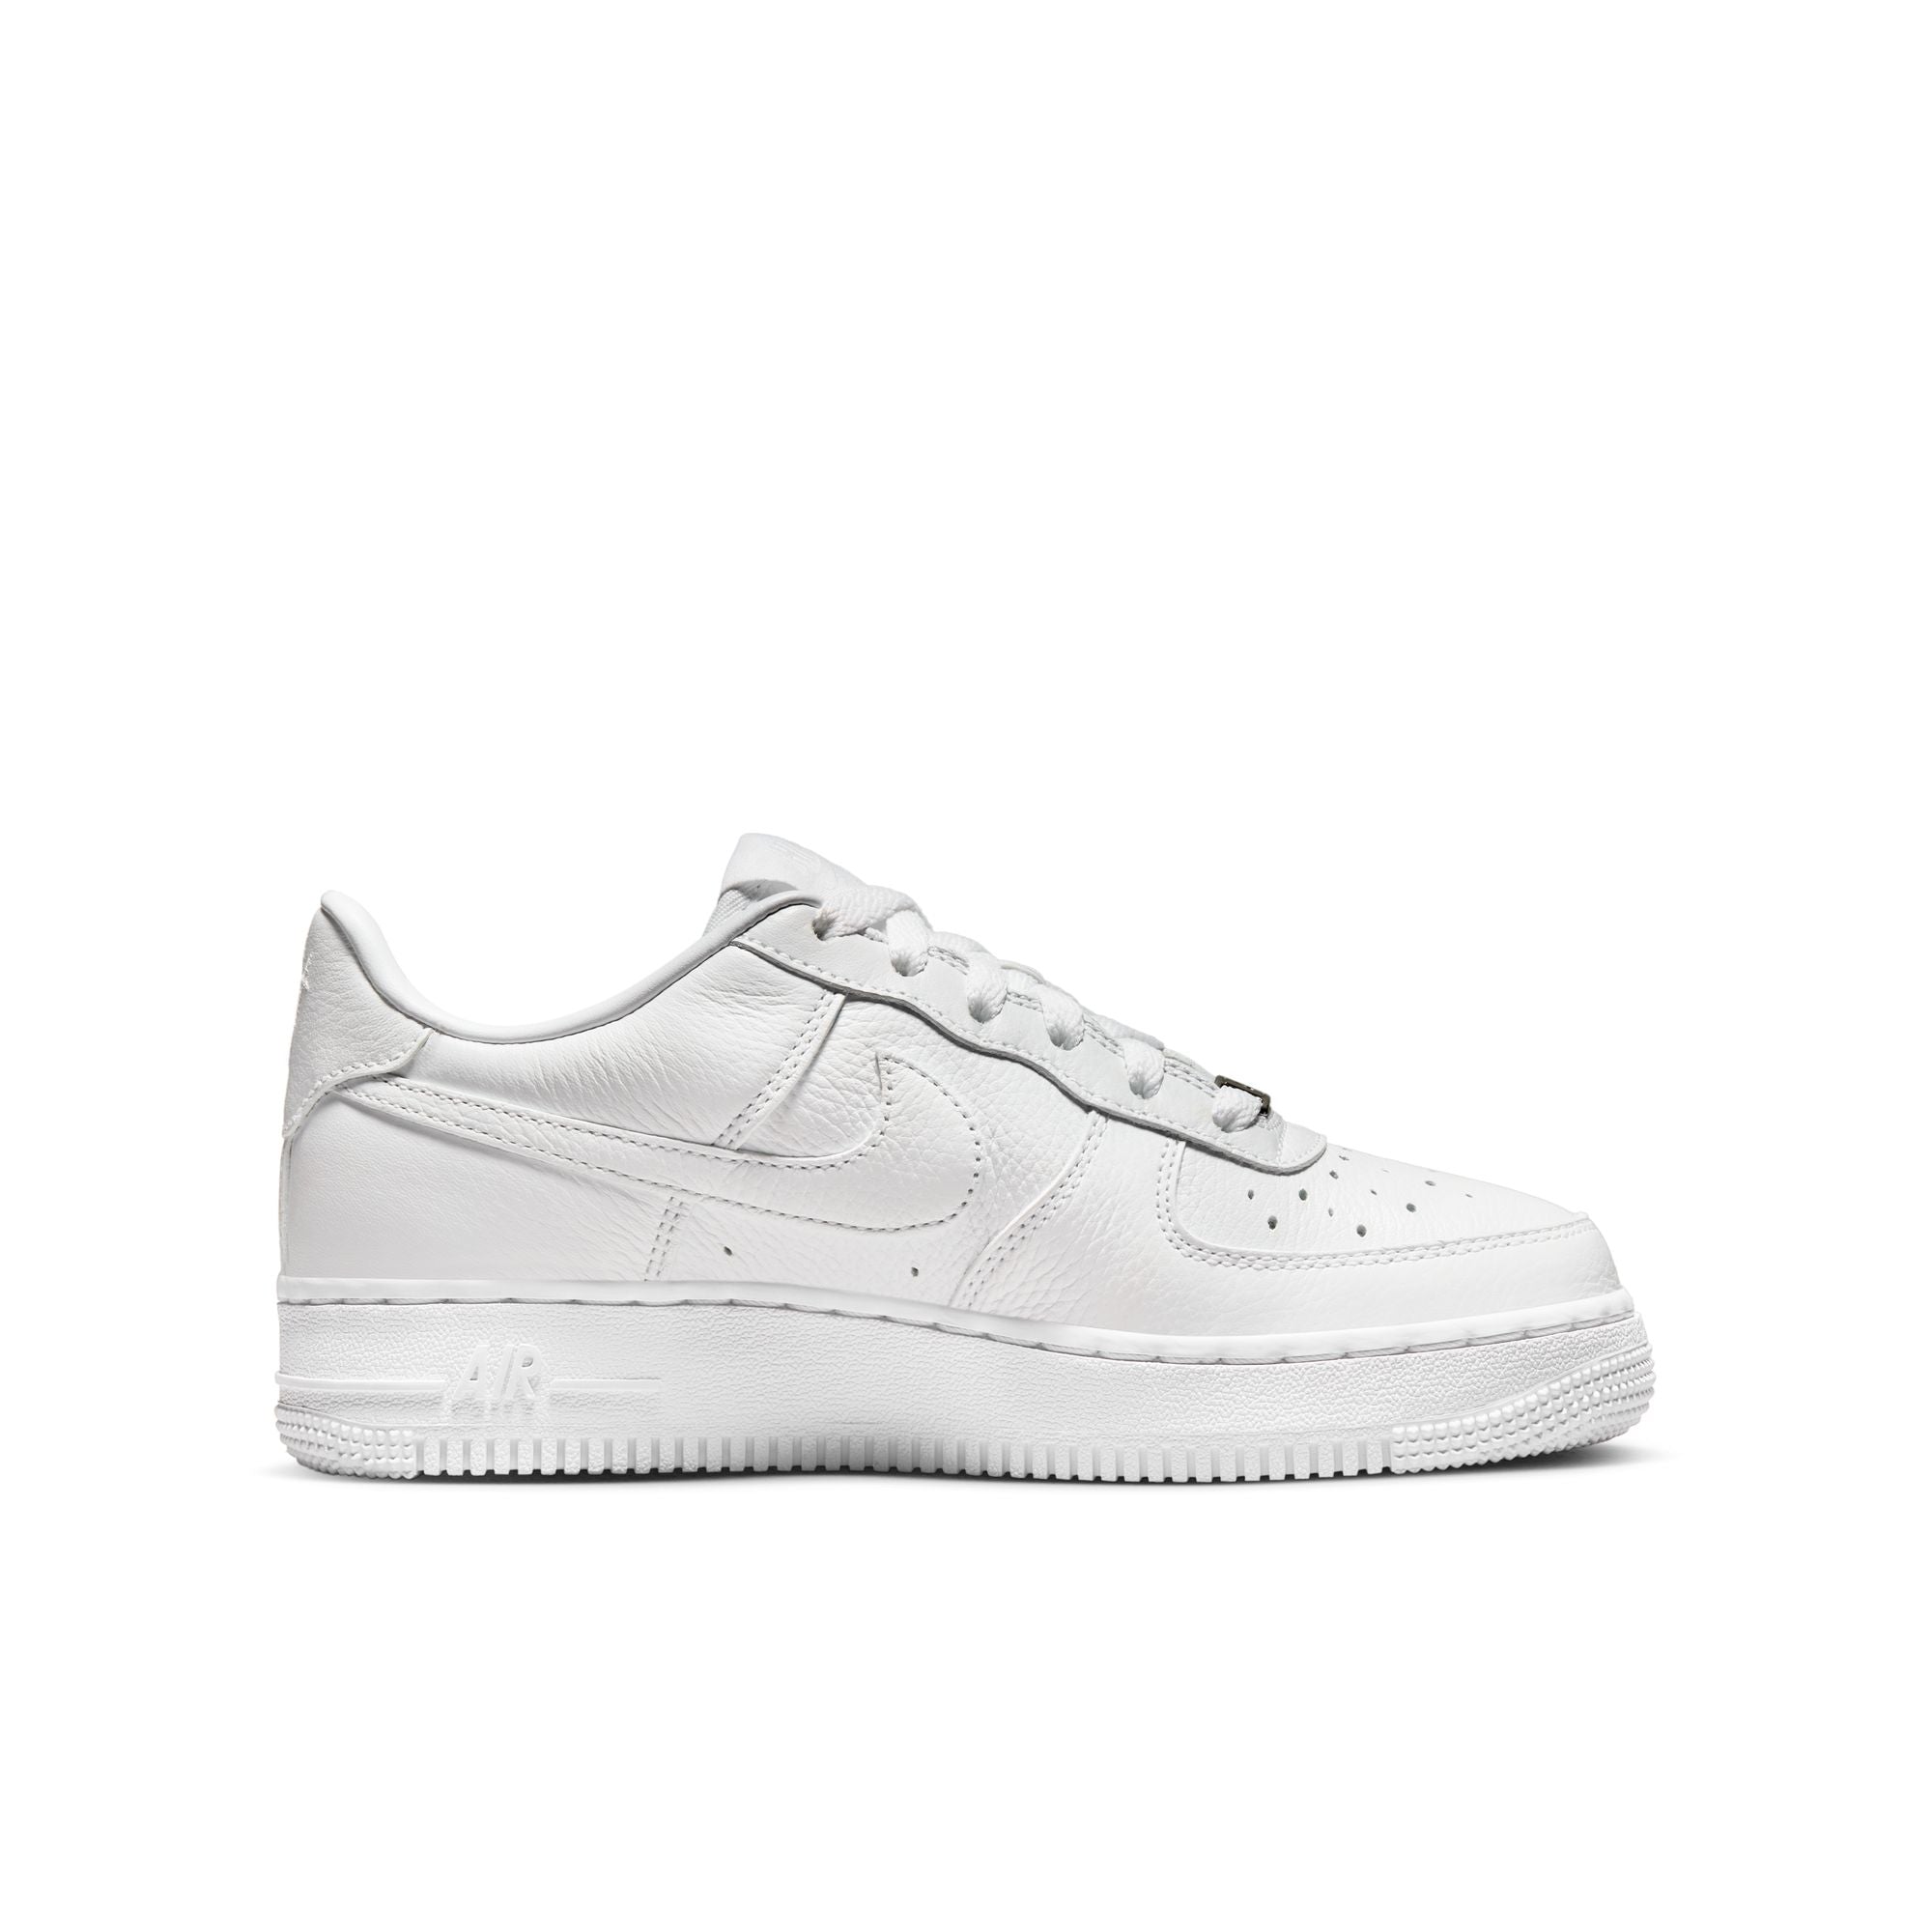 Nocta Nike Air Force 1 Low CLB (GS)